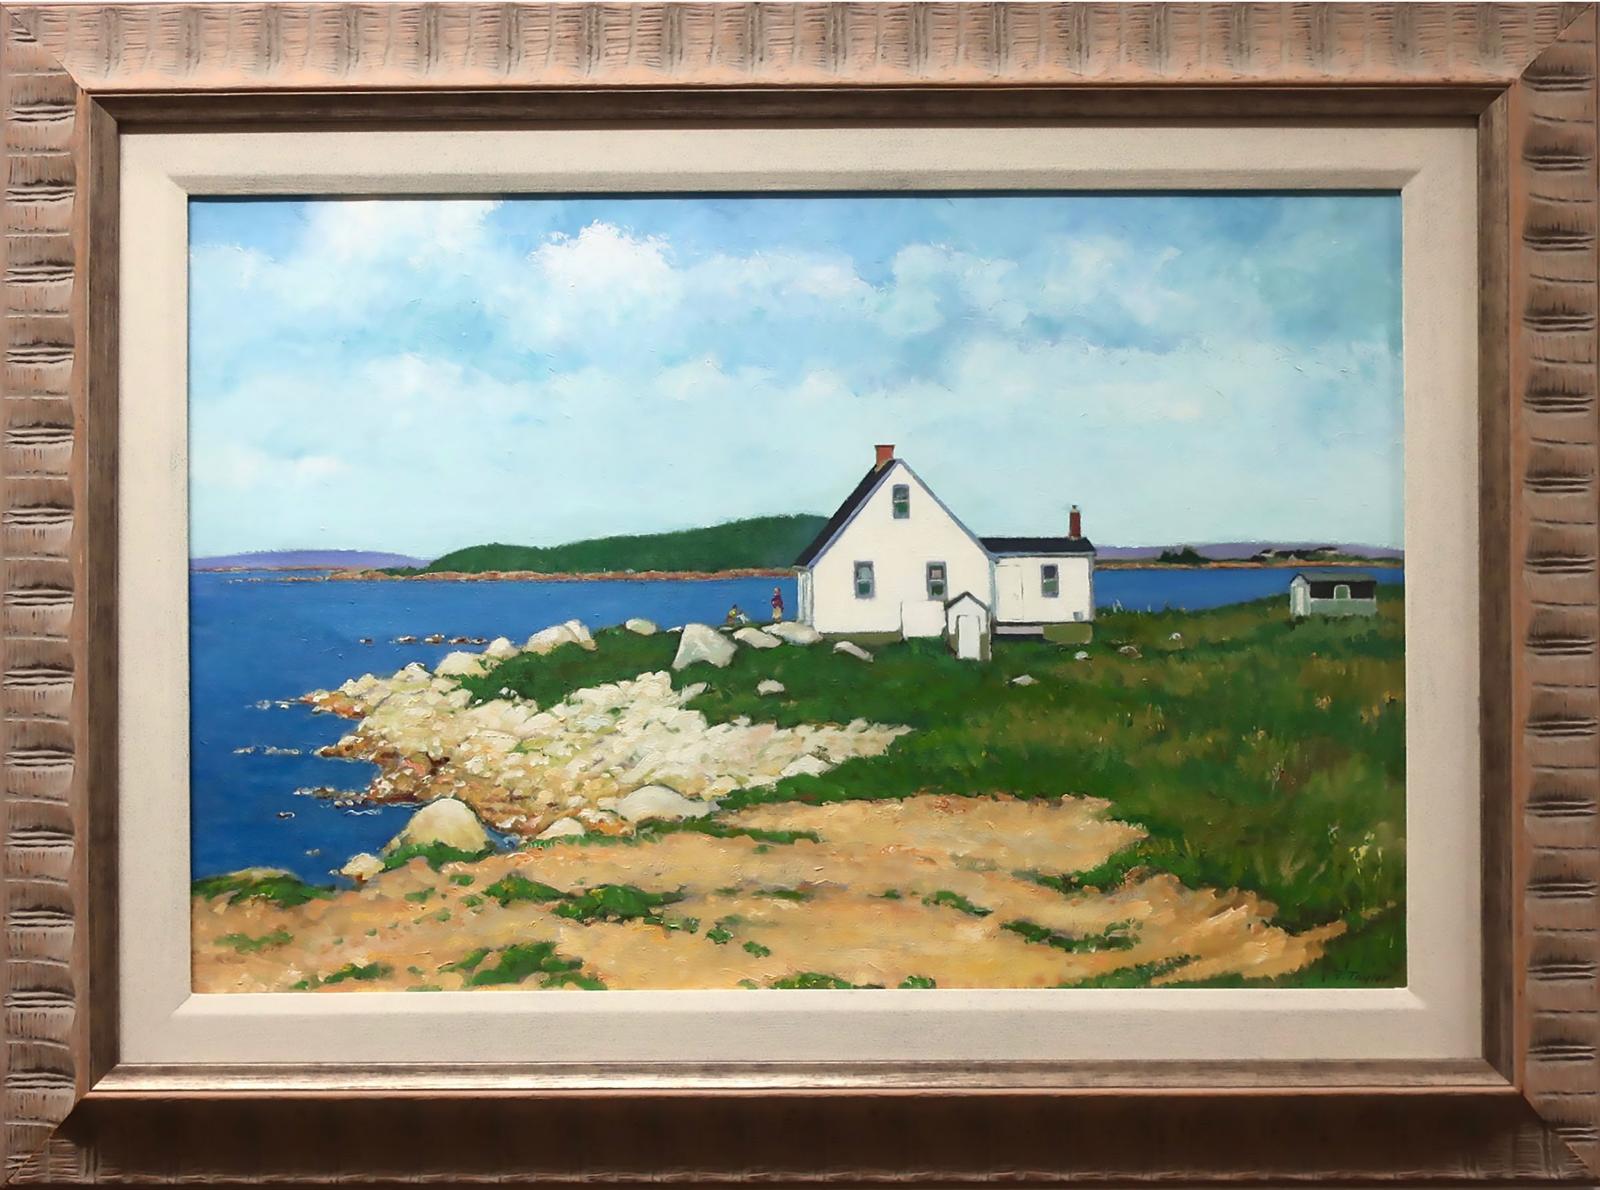 Frederick Bourchier Taylor (1906-1987) - White House By The Sea, Indian Harbour, N.S.